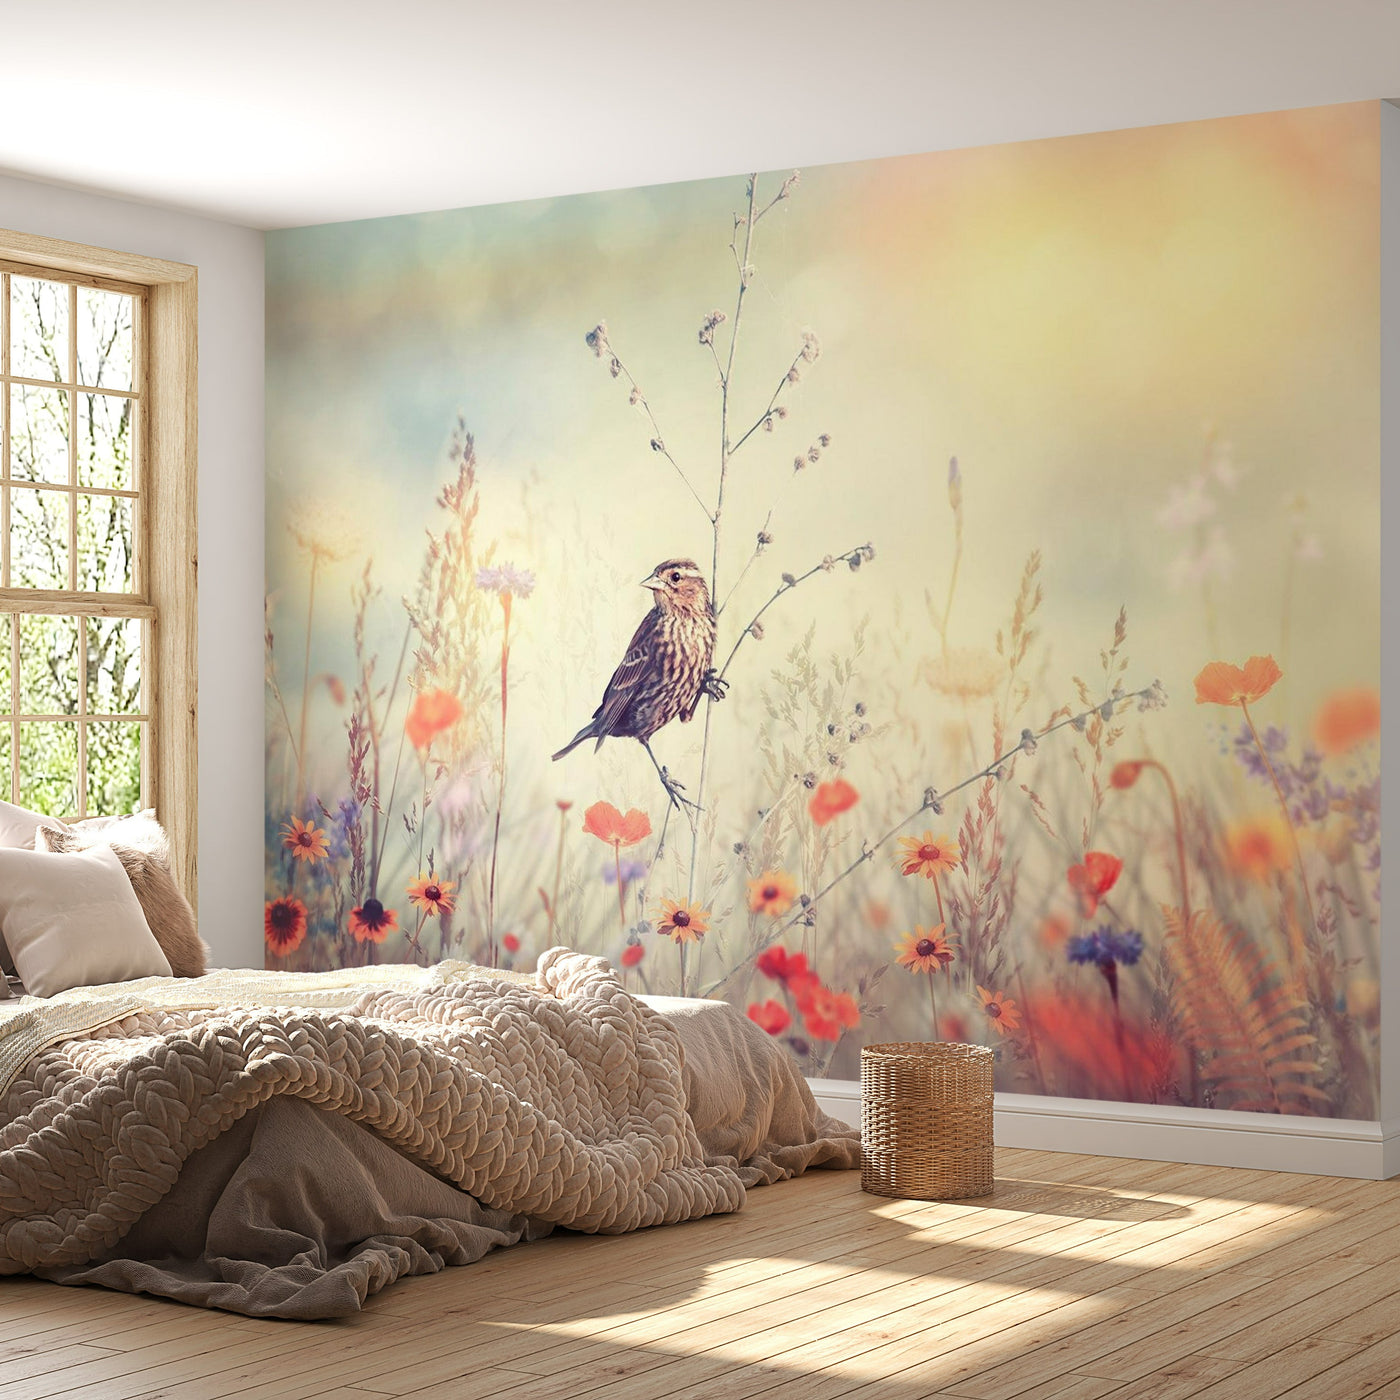 Peel & Stick Animal Wall Mural - Field Bird - Removable Wall Decals